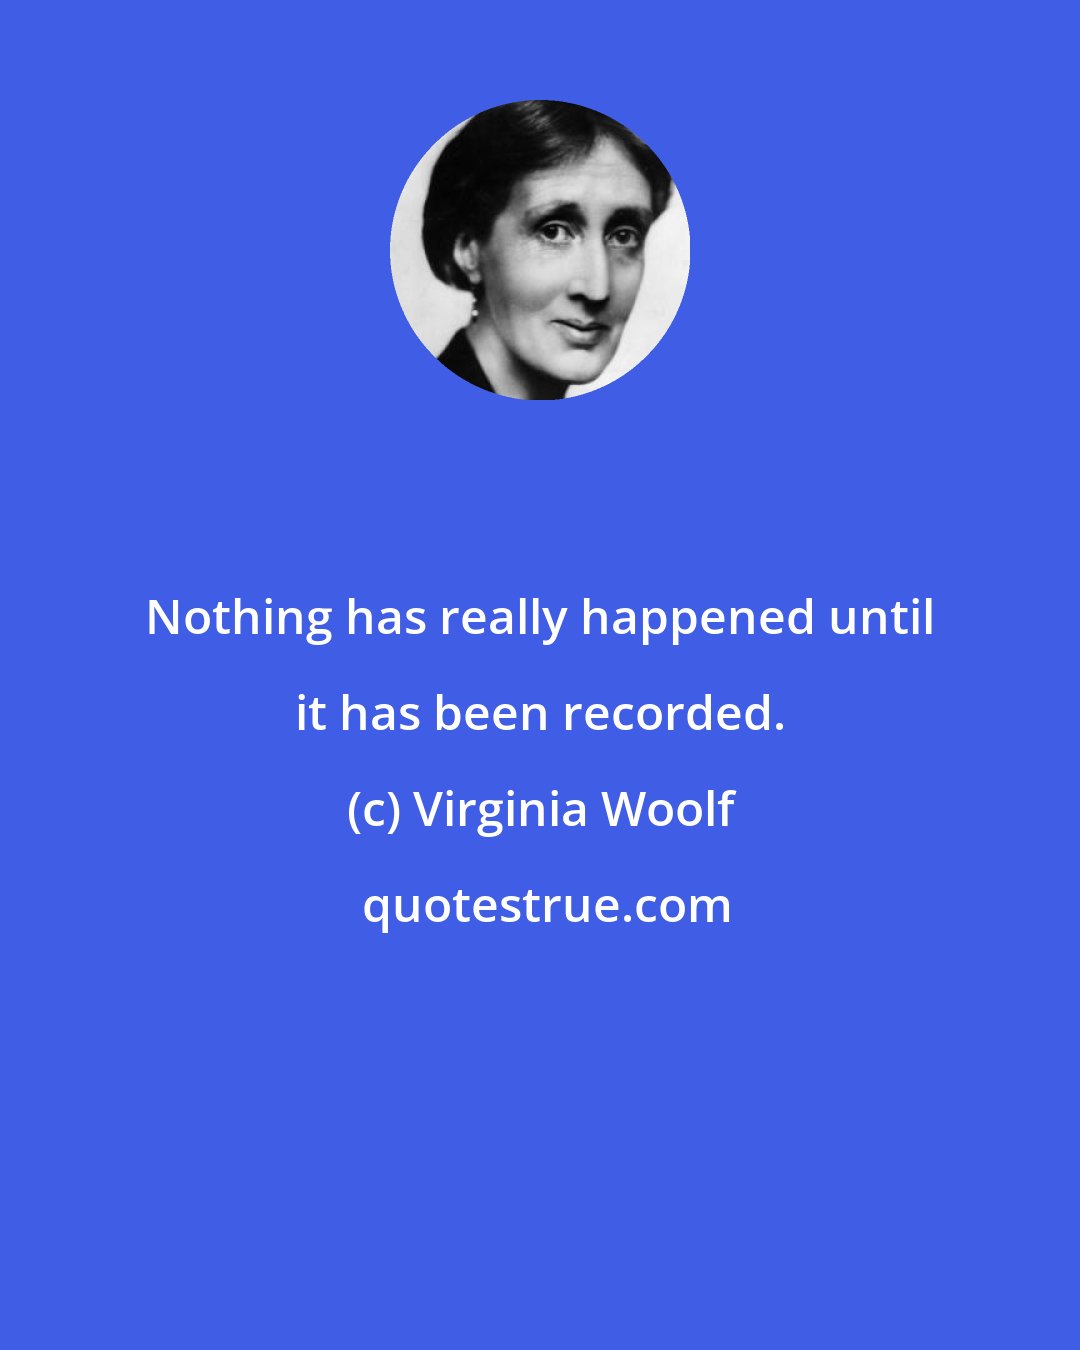 Virginia Woolf: Nothing has really happened until it has been recorded.